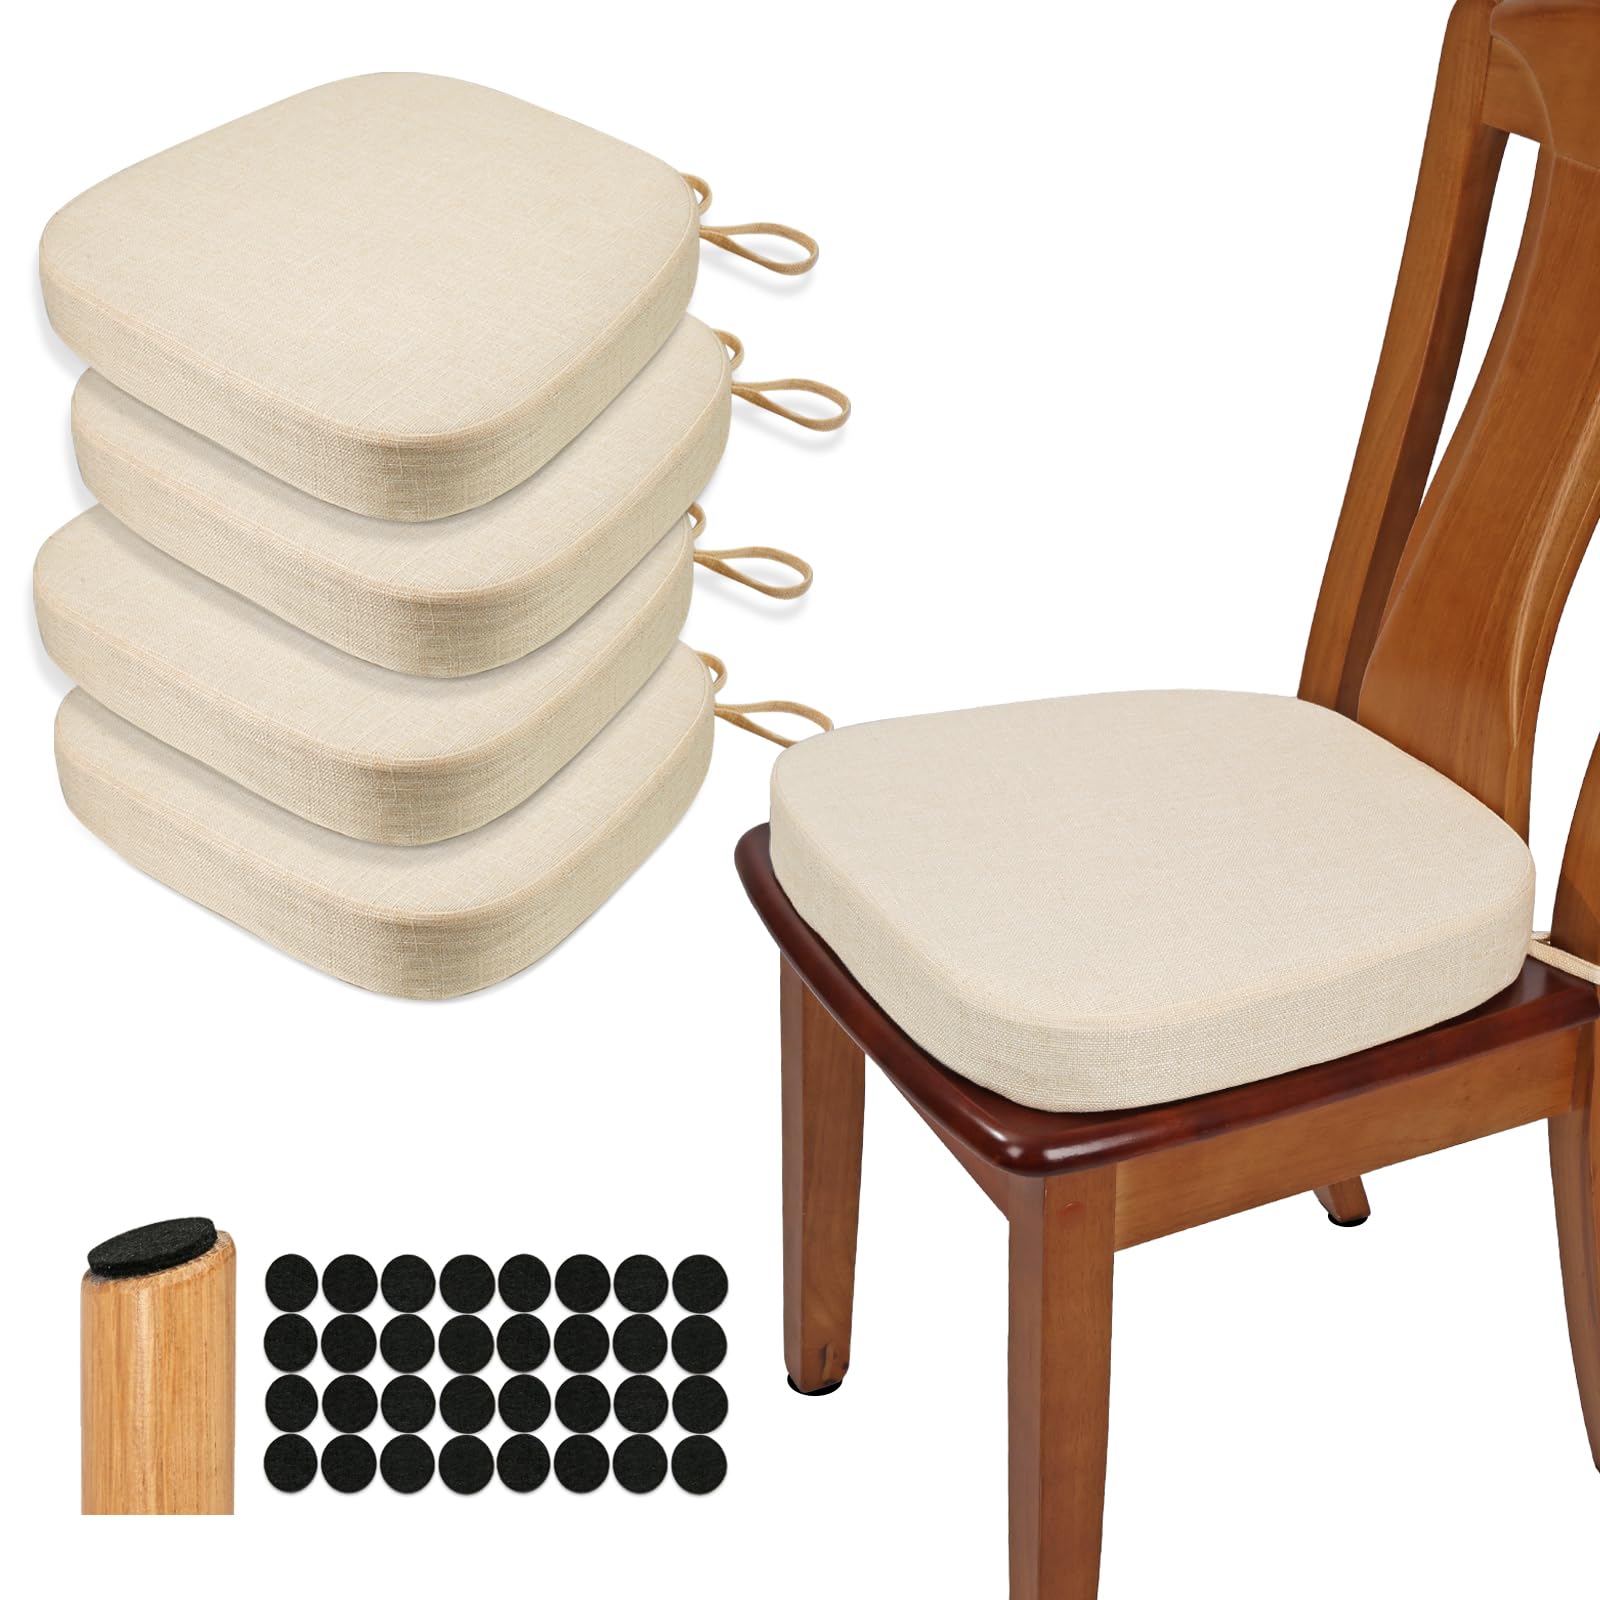 BUYUE Original Linen Thickened 2.5" Dining Chair Cushions Set of 4, U-Shape High Density Foam Comfortable Chair Pads for Kitchen, Slip Resistant Indoor Seat Cushions (4 PCS, Beige)